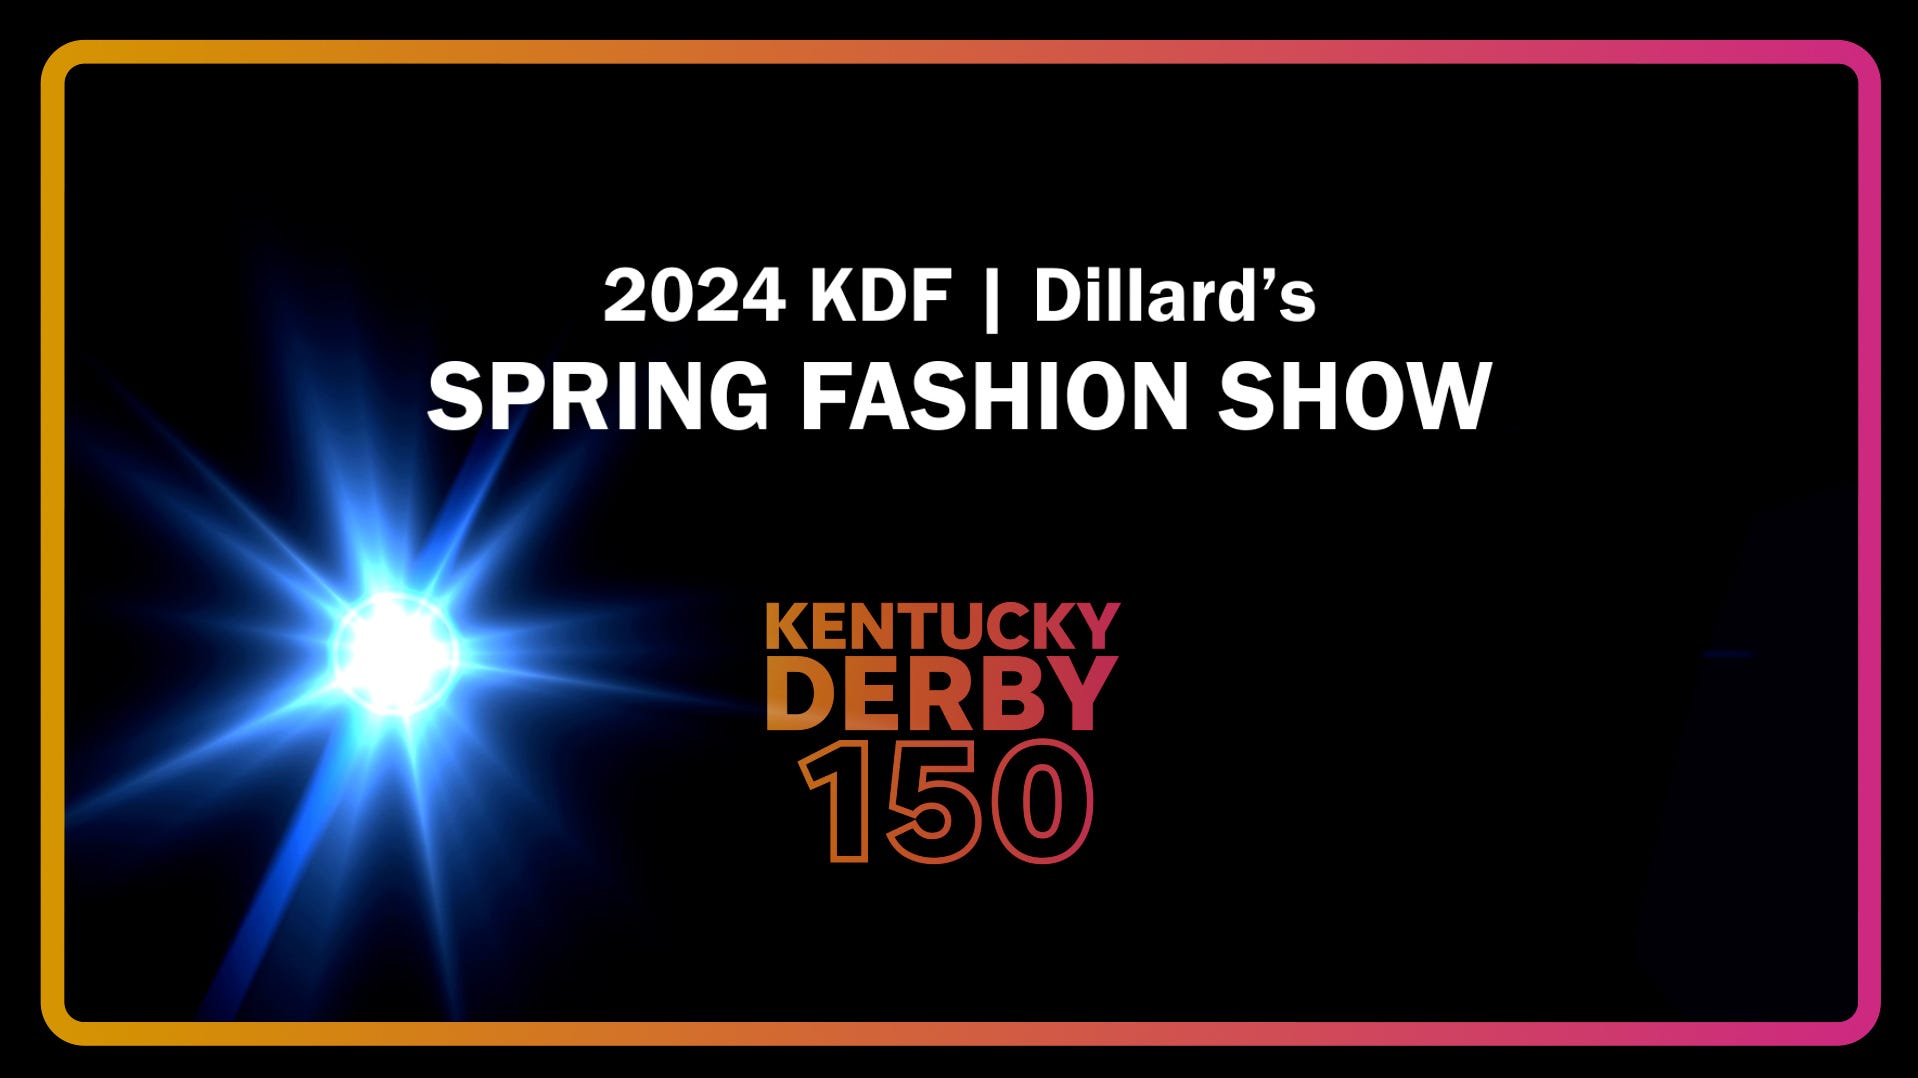 SEE IT: The top Kentucky Derby outfits, trends from the 2024 KDF Spring Fashion Show